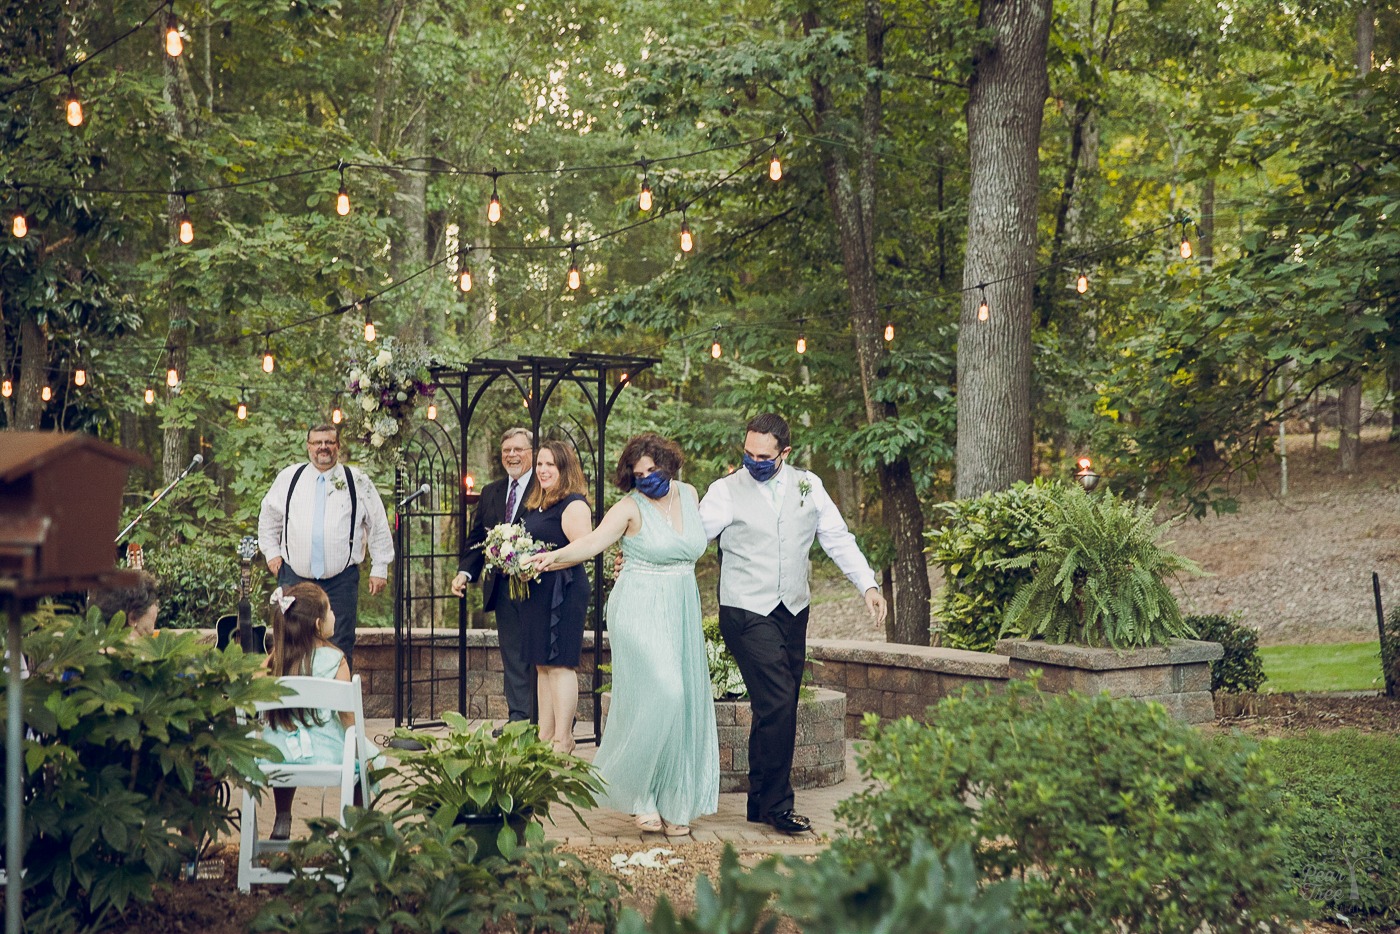 End of backyard wedding ceremony as bride and groom in masks make their exit